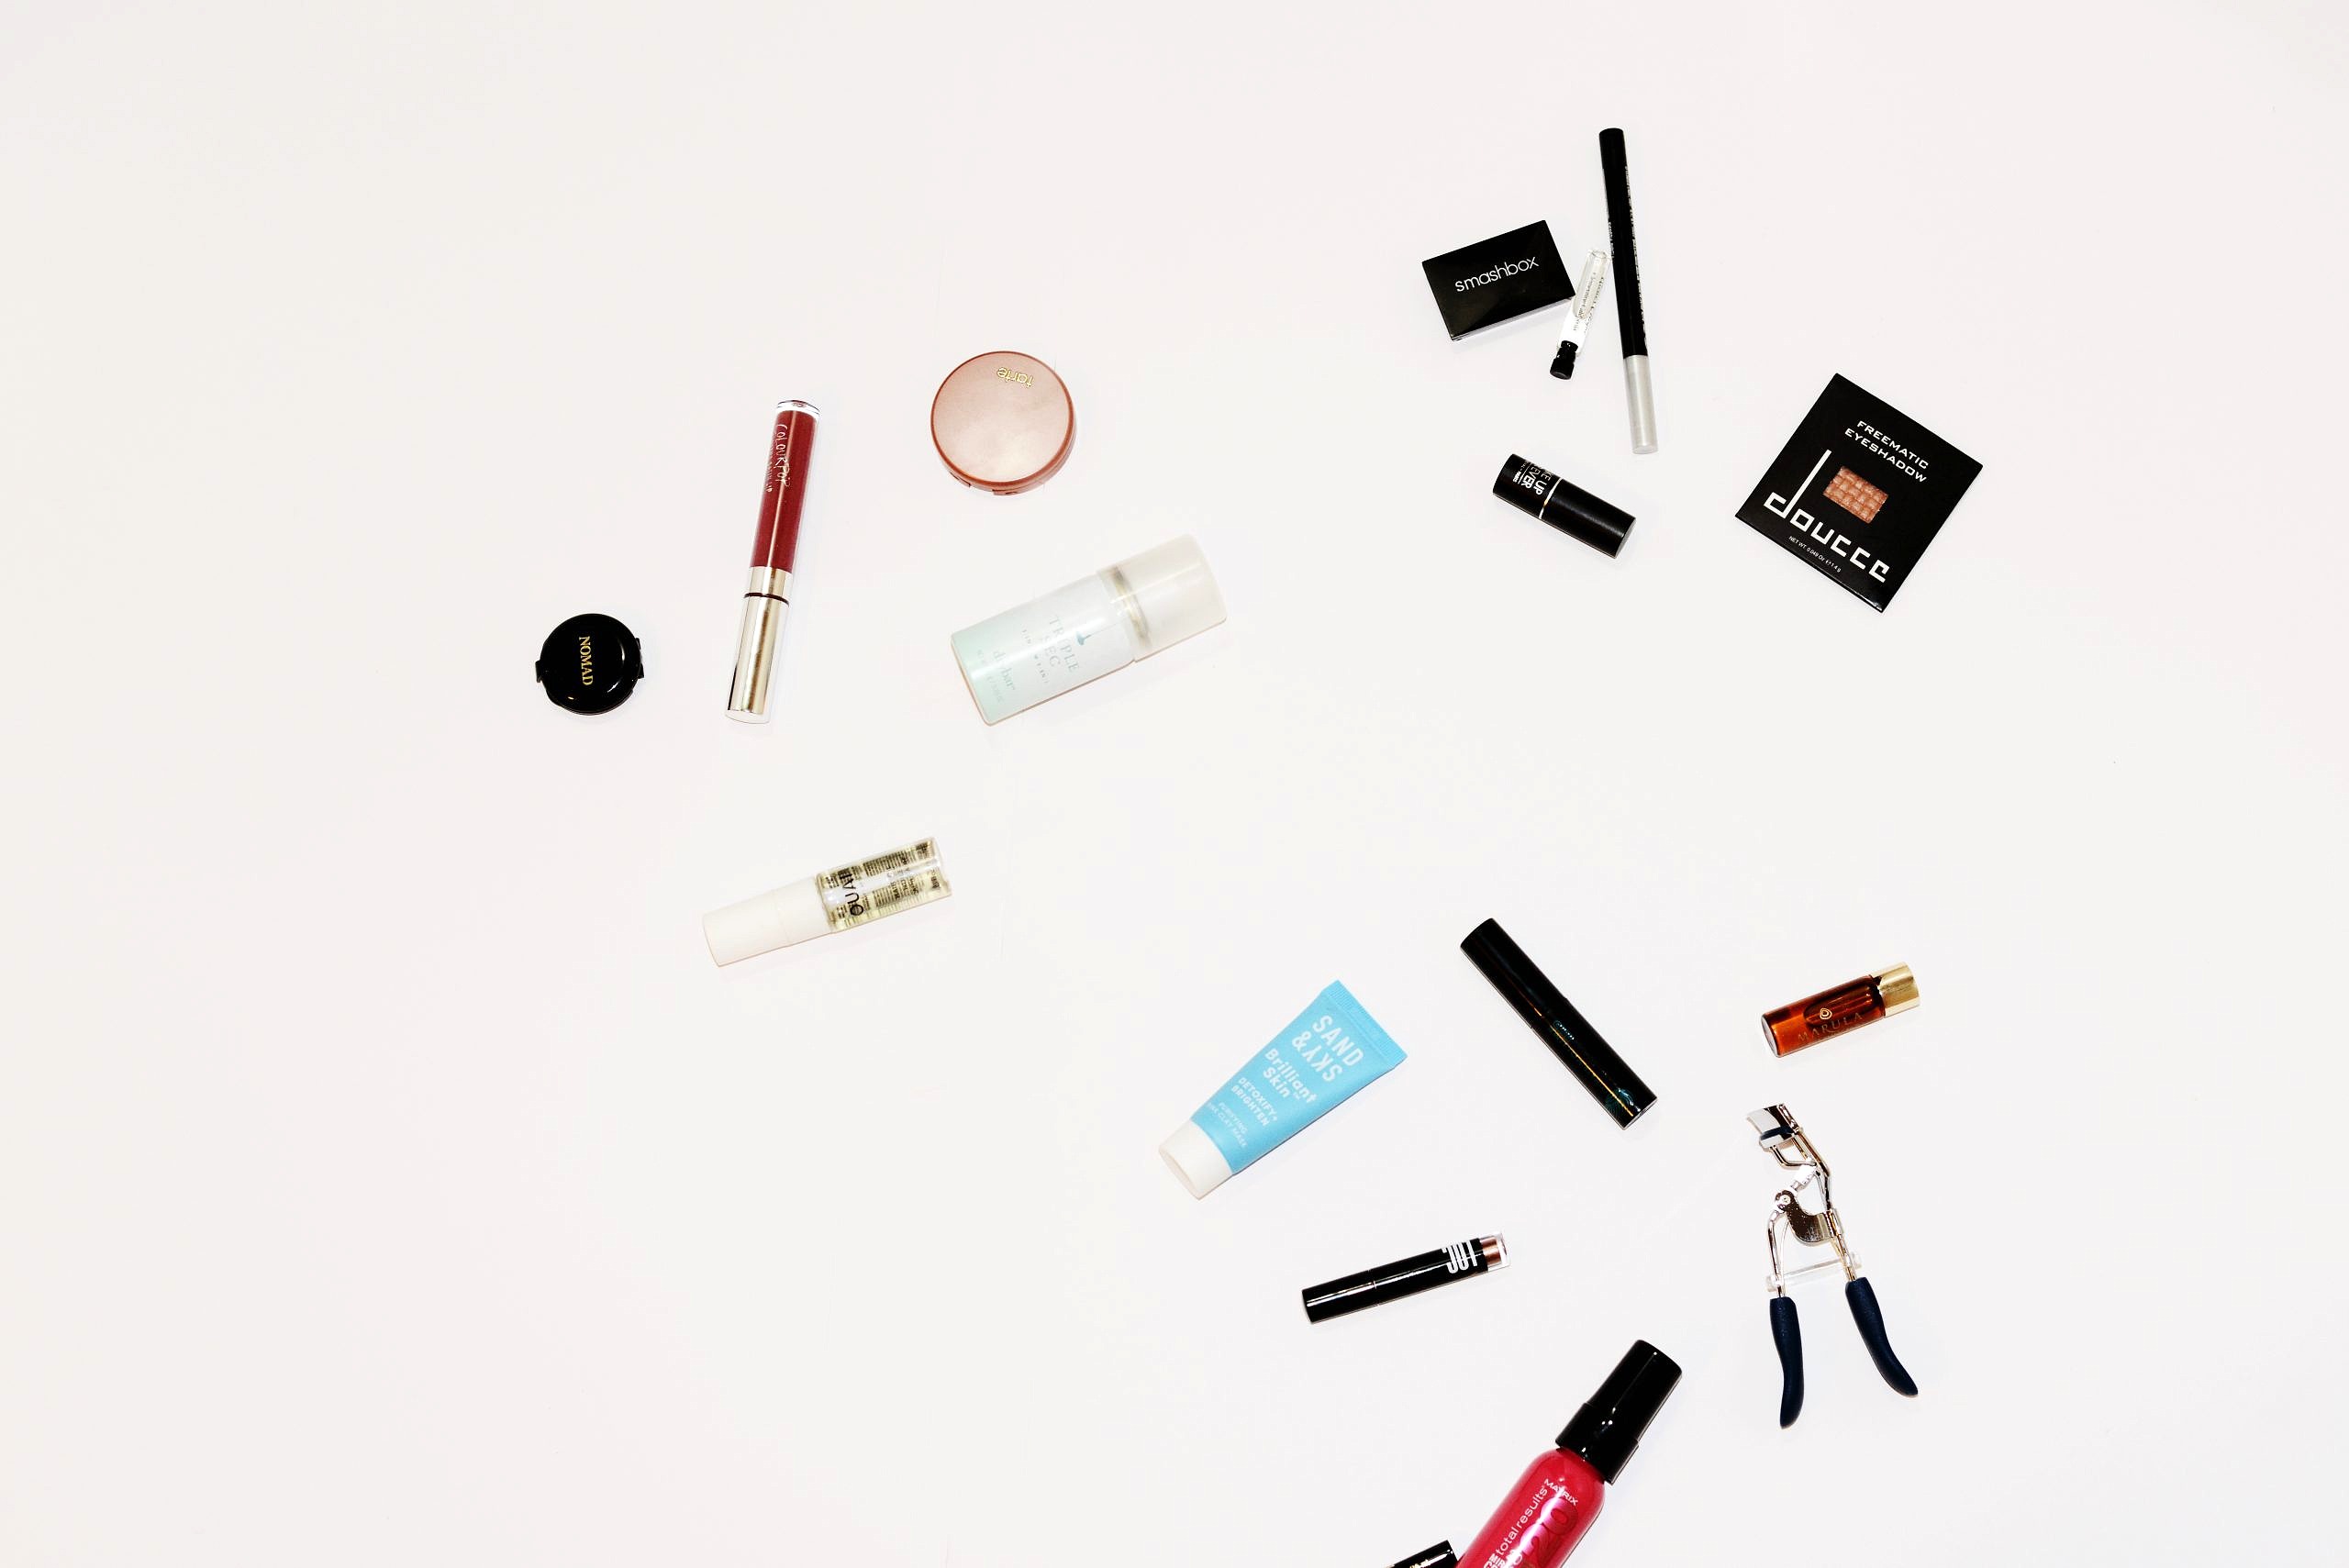 Sephora to take on Birchbox in subscription beauty box business - New York  Business Journal